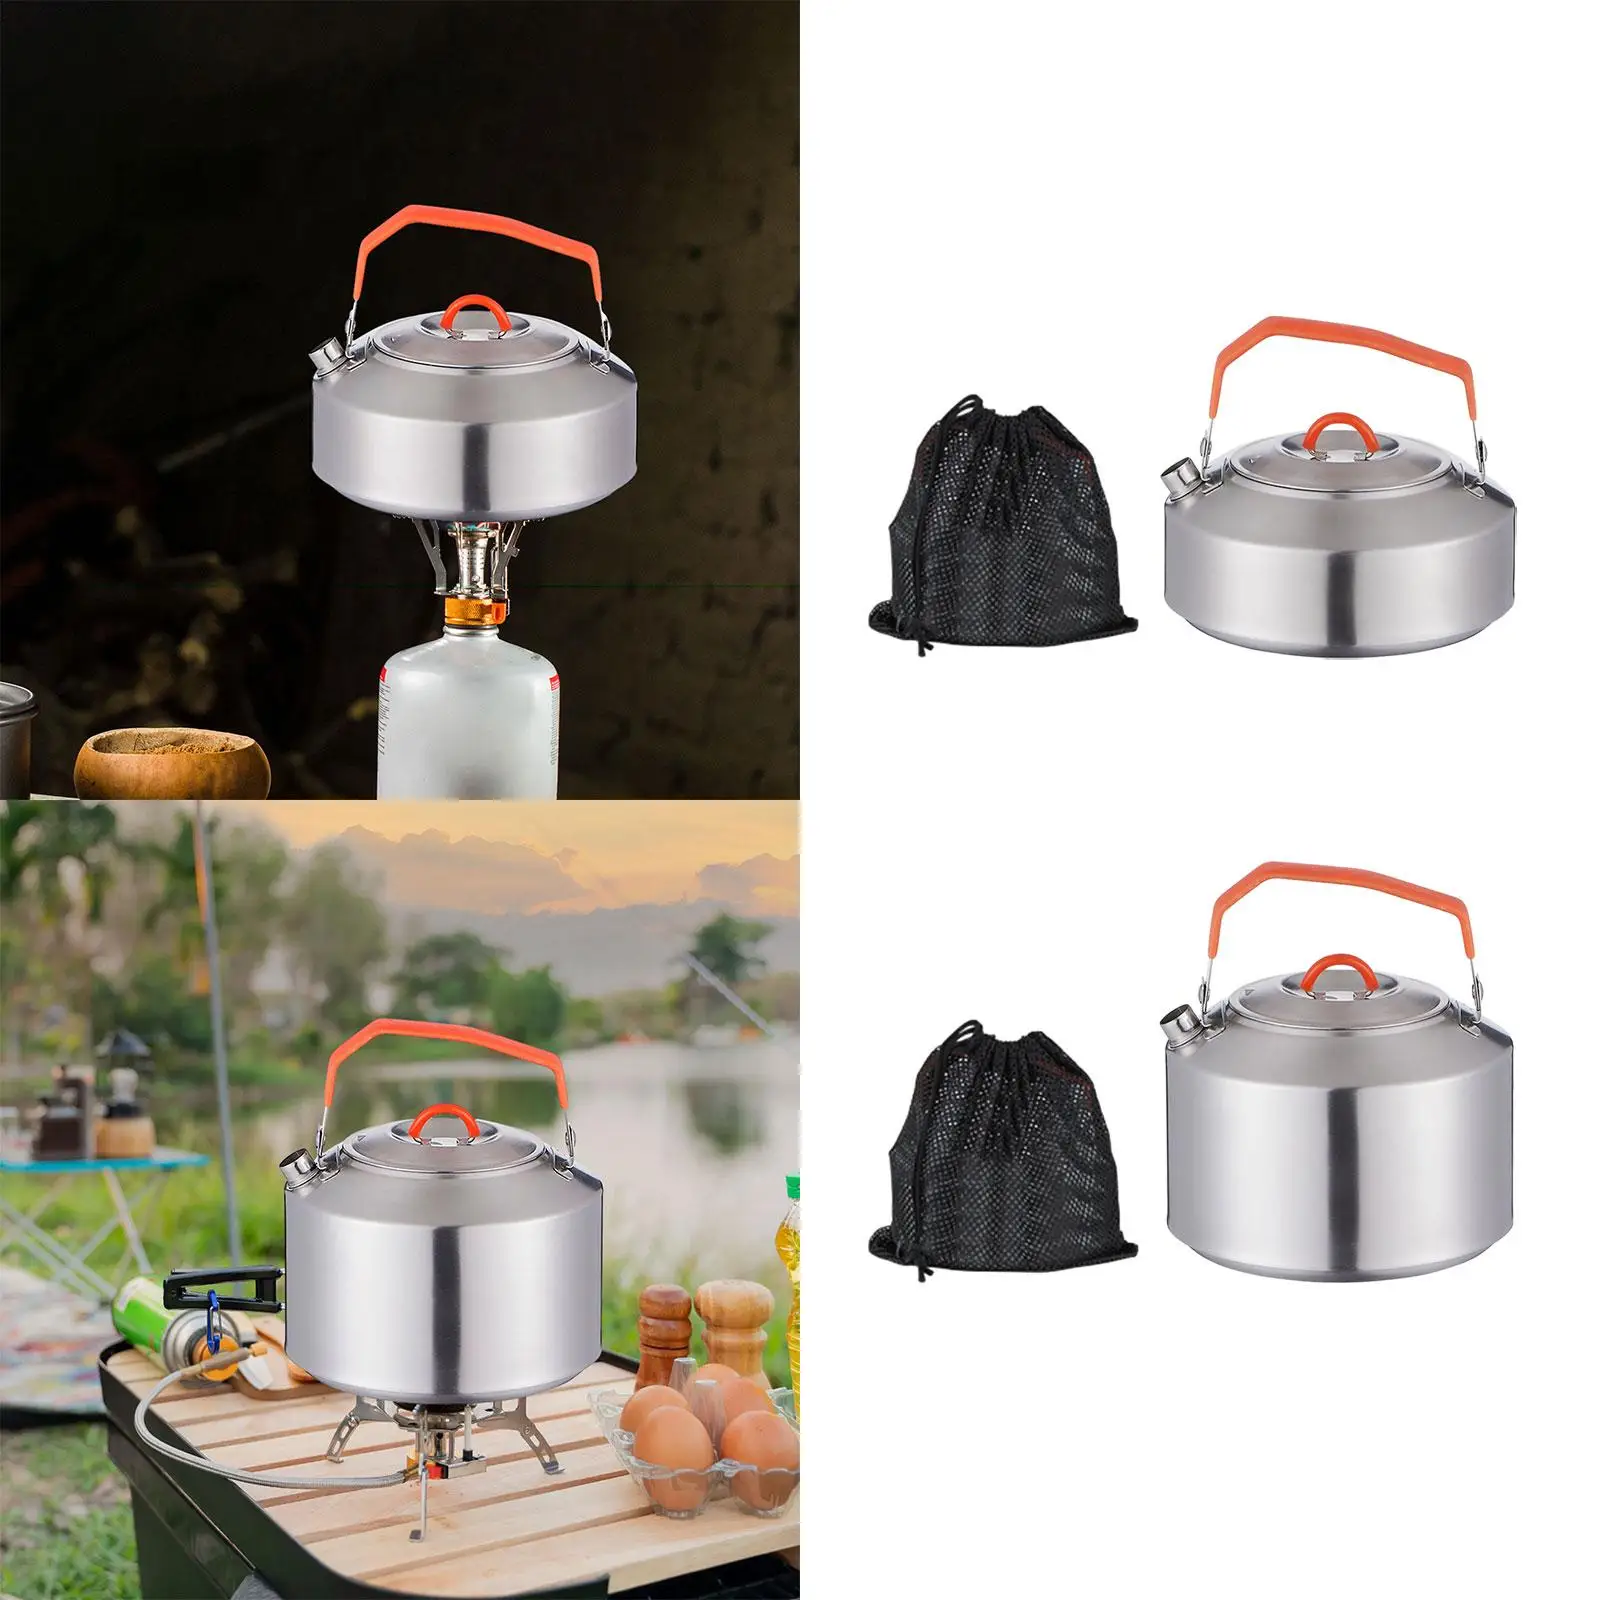 Camping Water Kettle Teakettle Teapot for Mountaineering Backpacking Travel